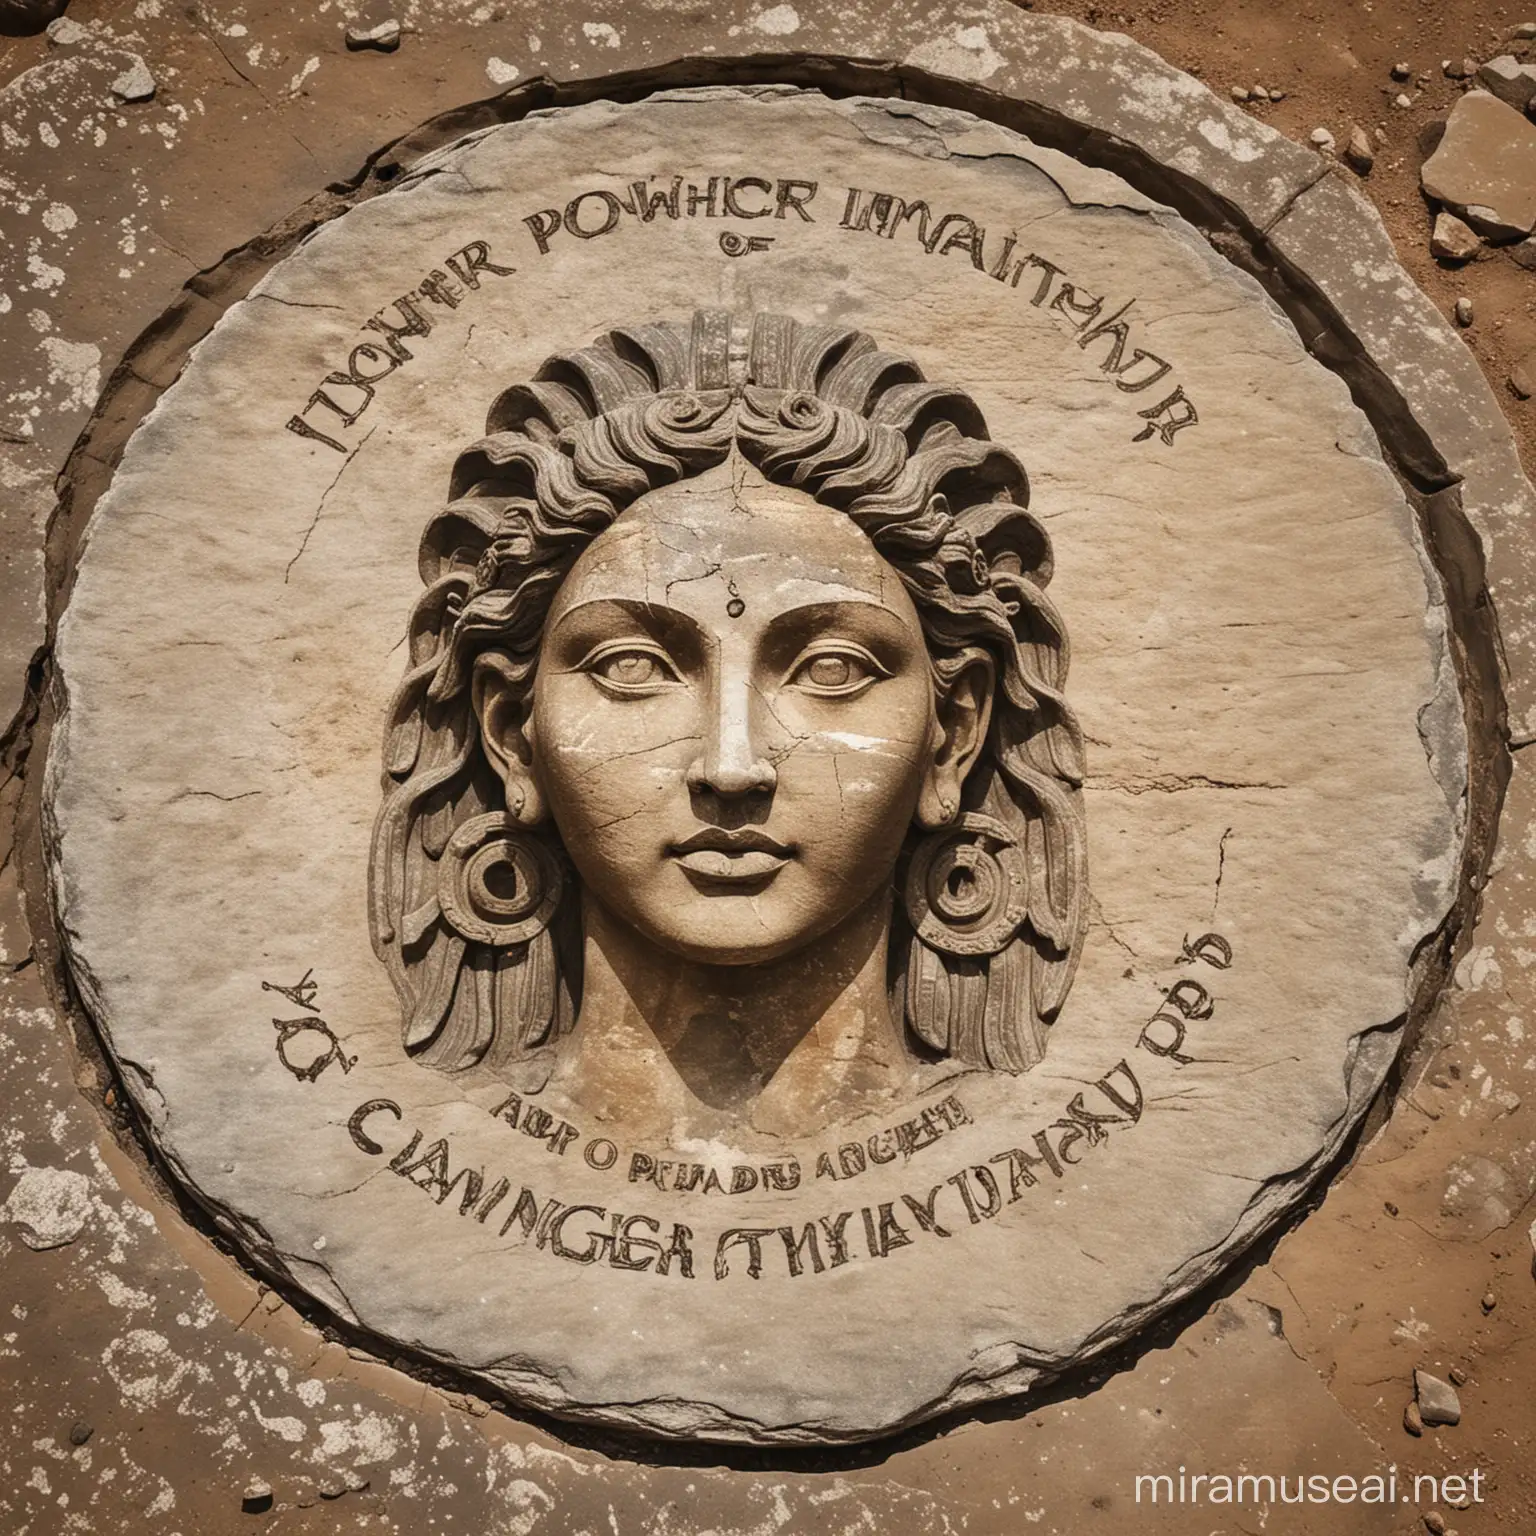 generate a big bold text: "YOUR POWER OF IMAGINATION" on a circle around the ancient stone potrait of a powerful ancient goddess.